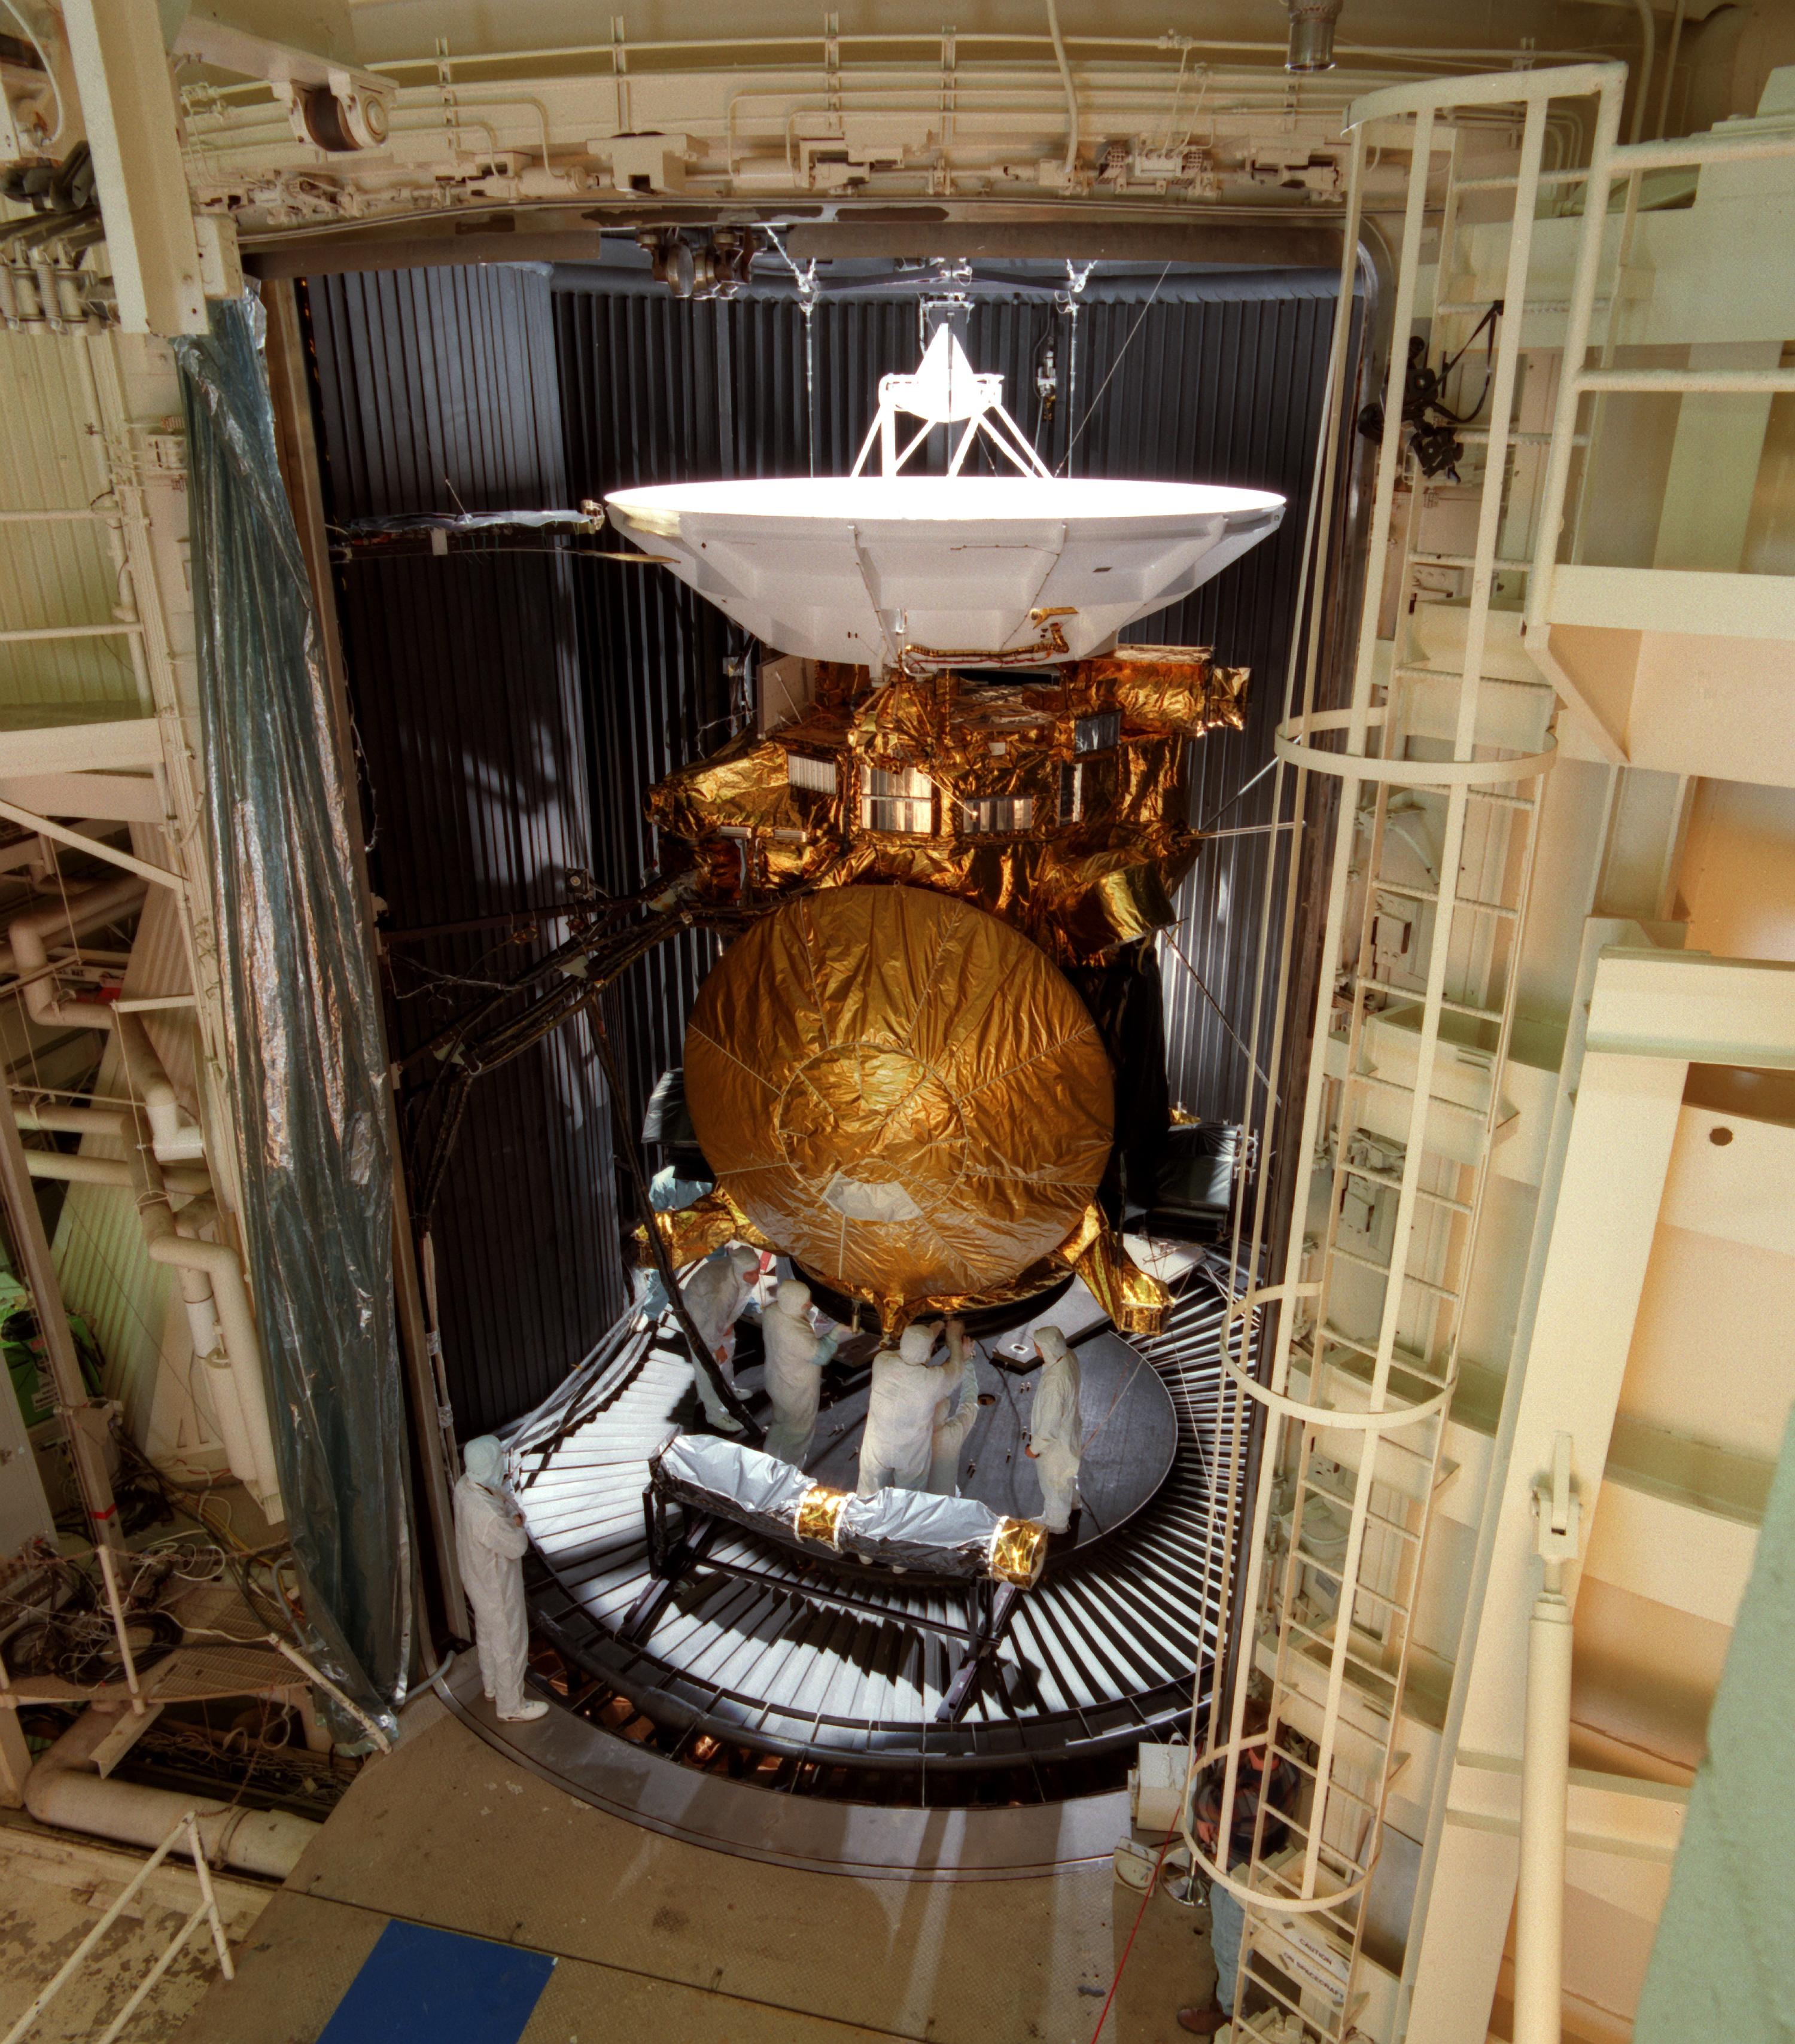 Cassini in the testing chamber